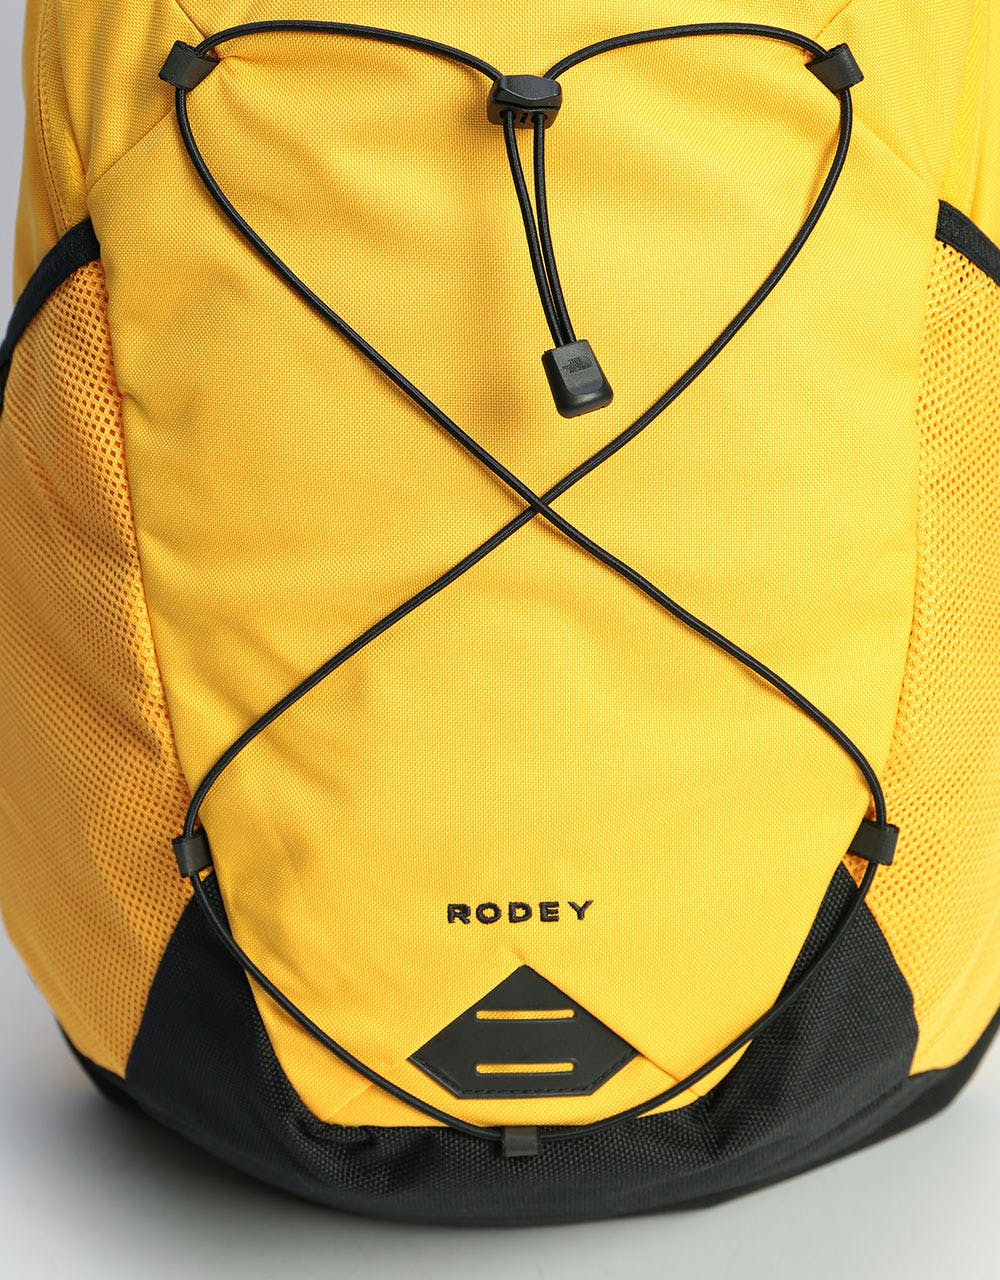 The North Face Rodey Backpack - TNF Yellow/TNF Black